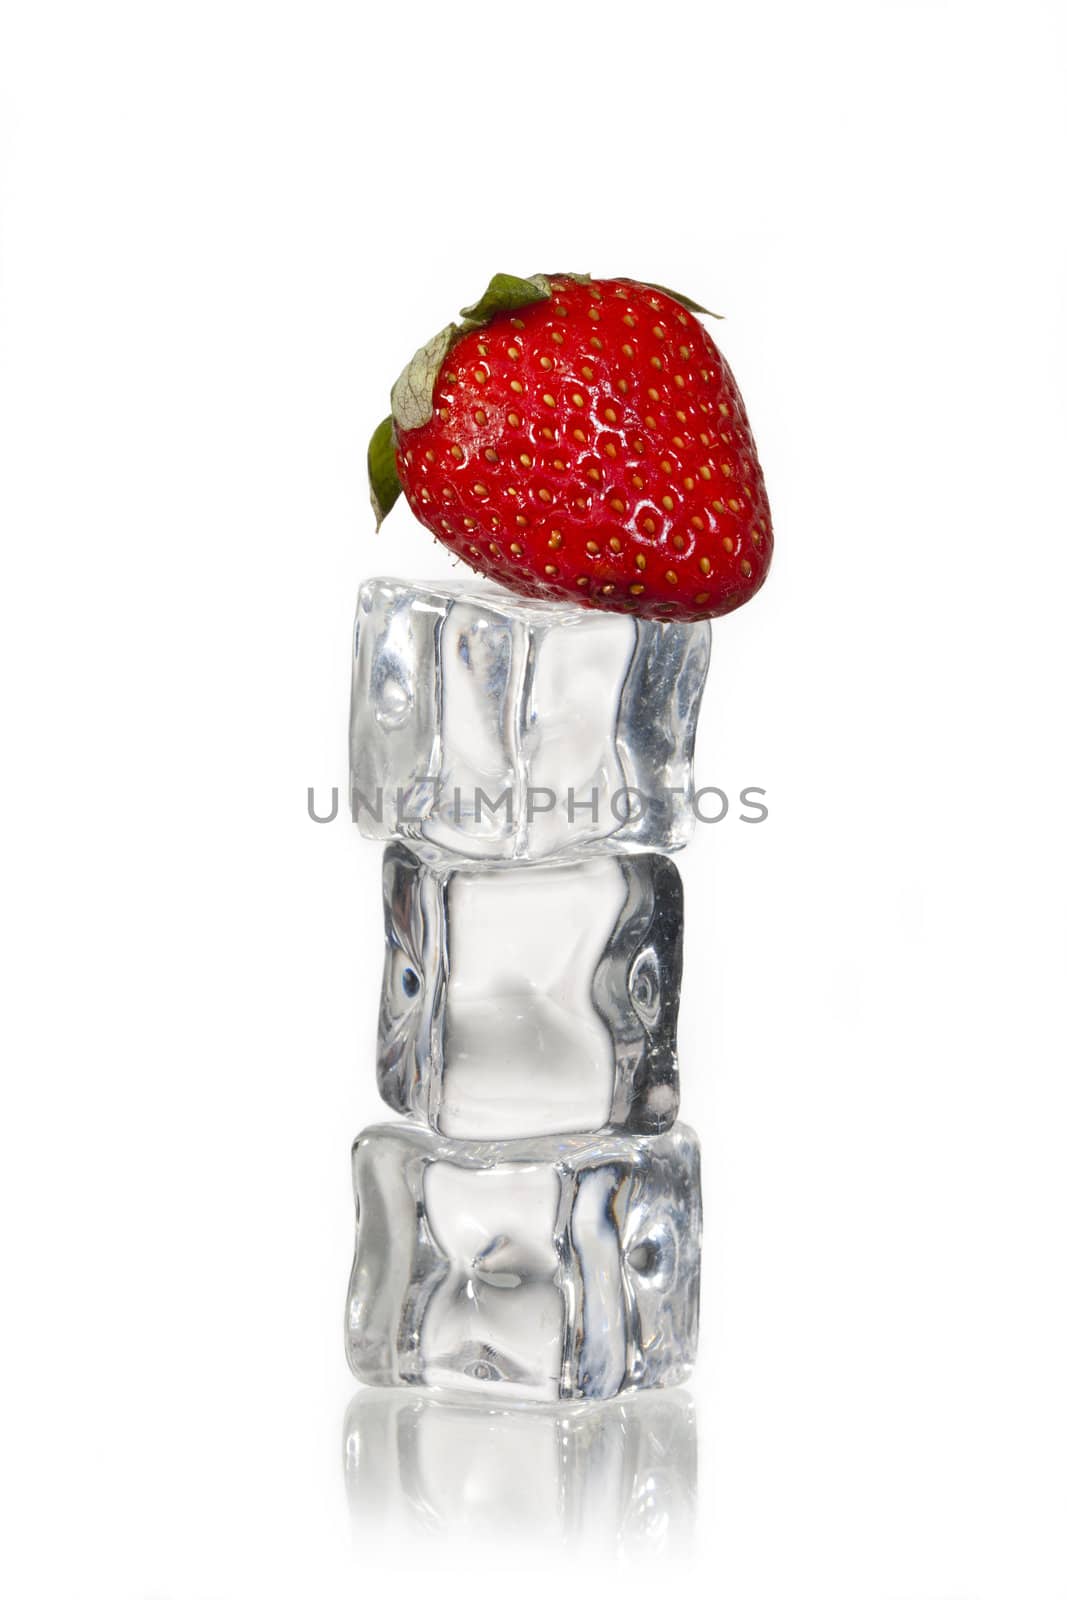 stack of ice cubes with strawberry on top by kozzi